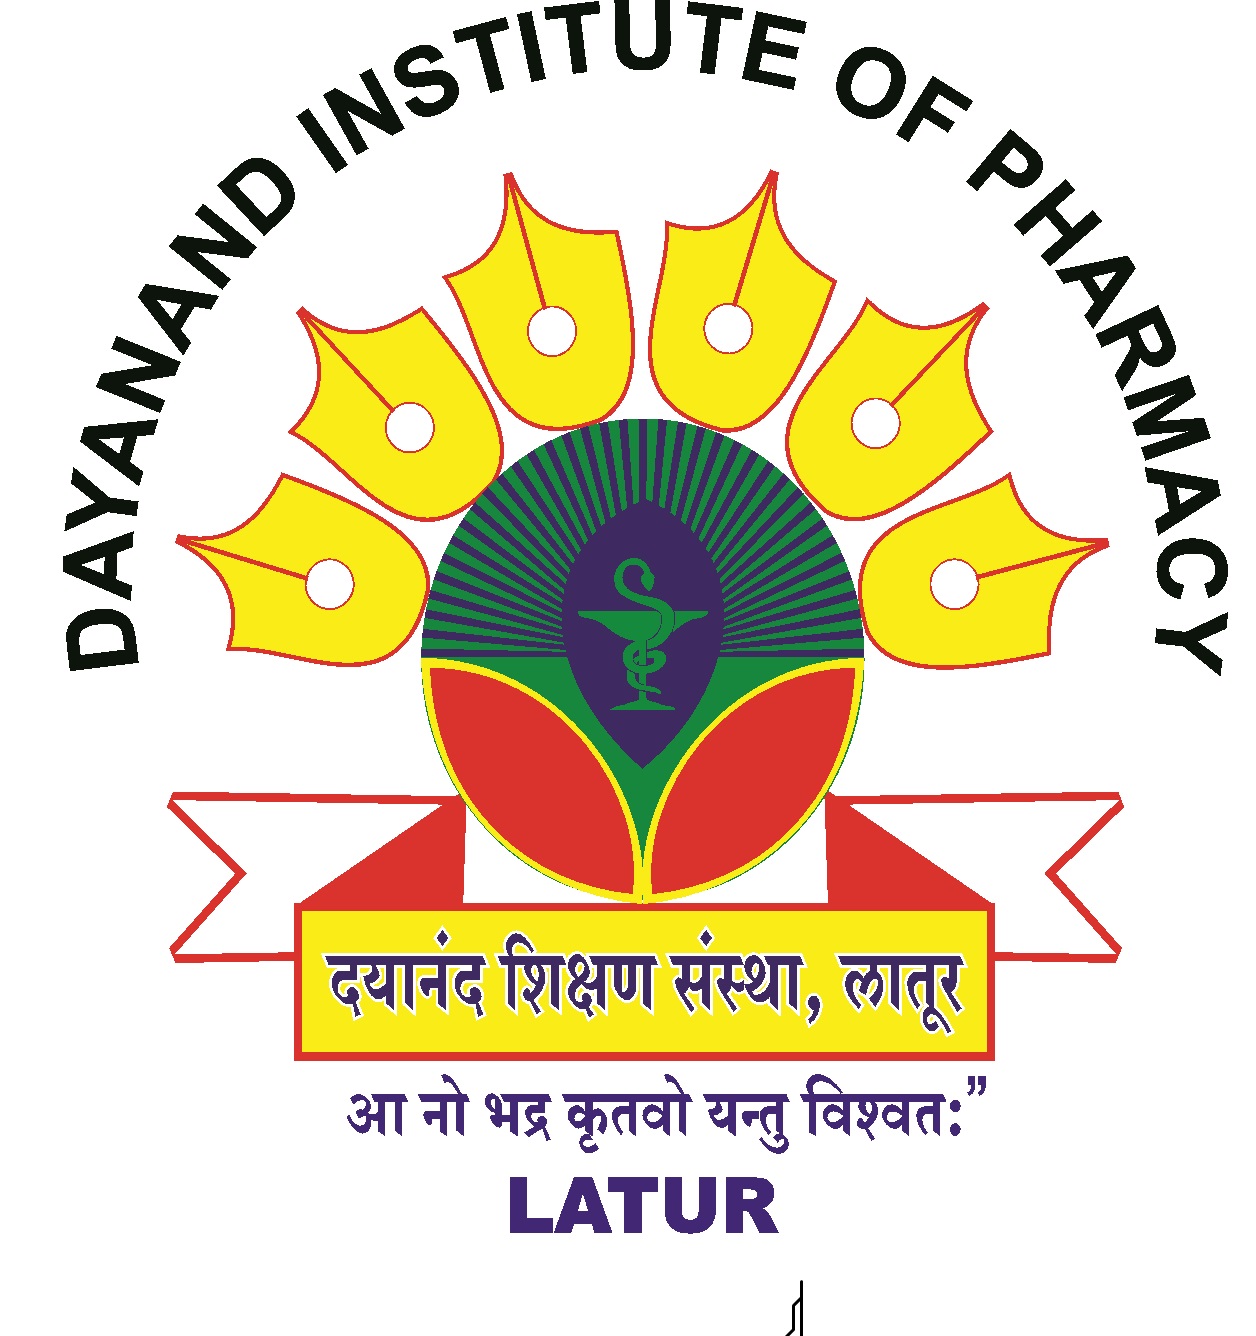 DAYANAND EDUCATION SOCIETY'S DAYANAND INSTITUTE OF PHARMACY